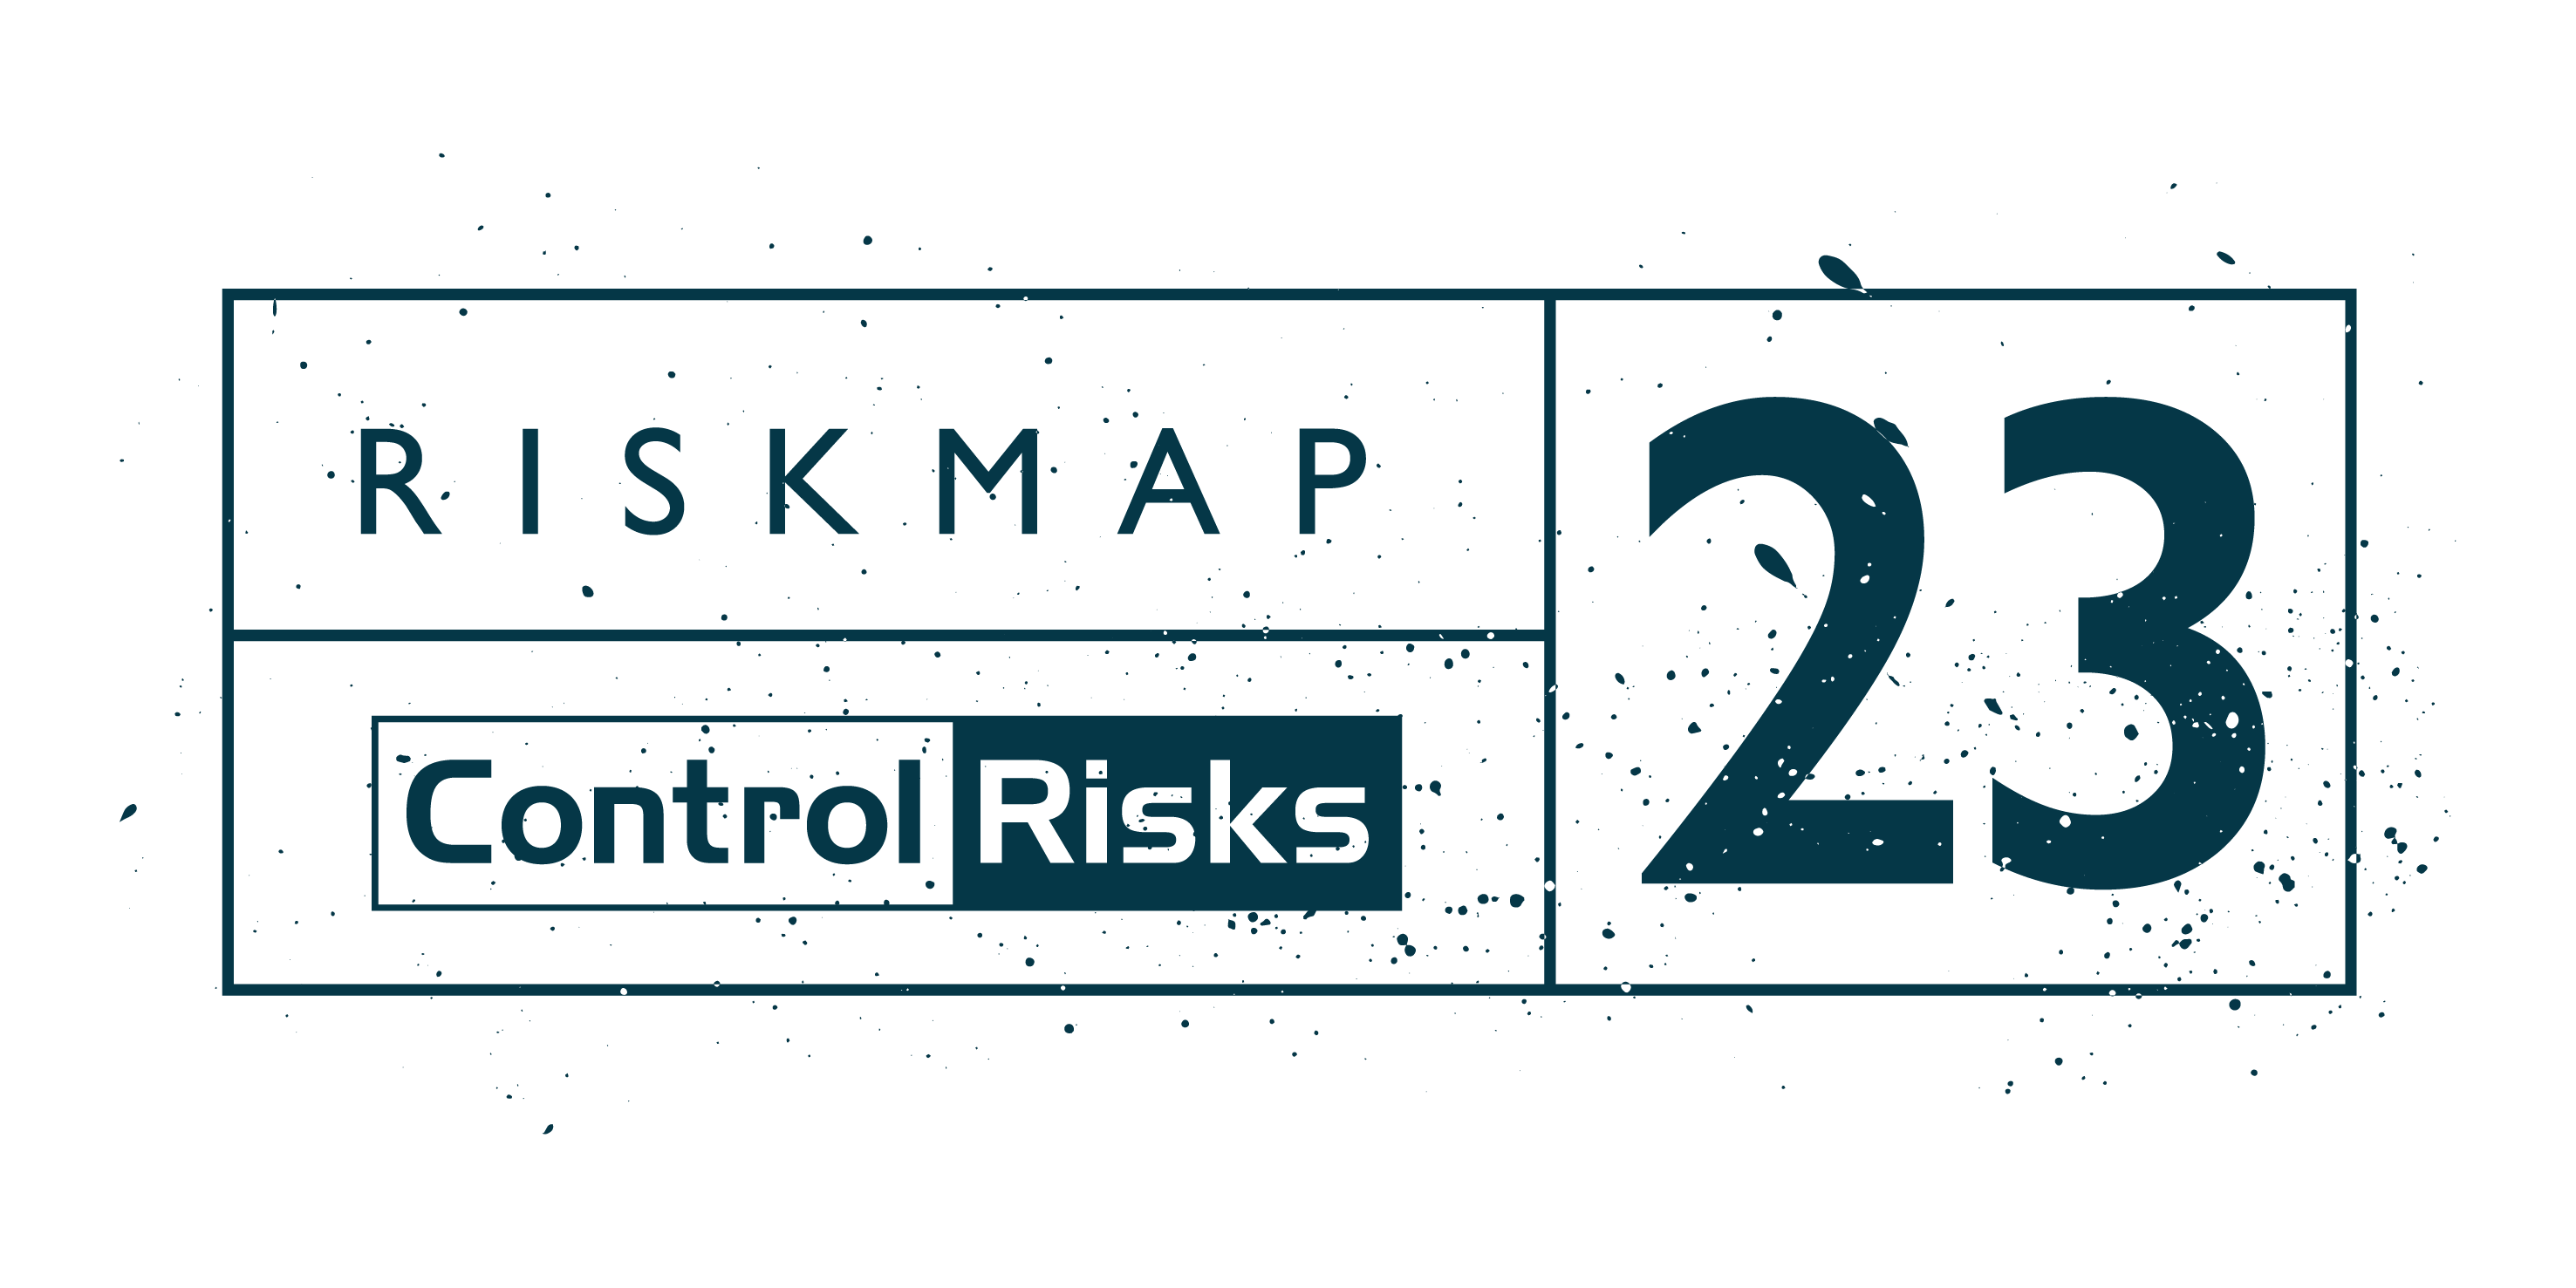 Control Risks launches the Top Risks for Business in 2023